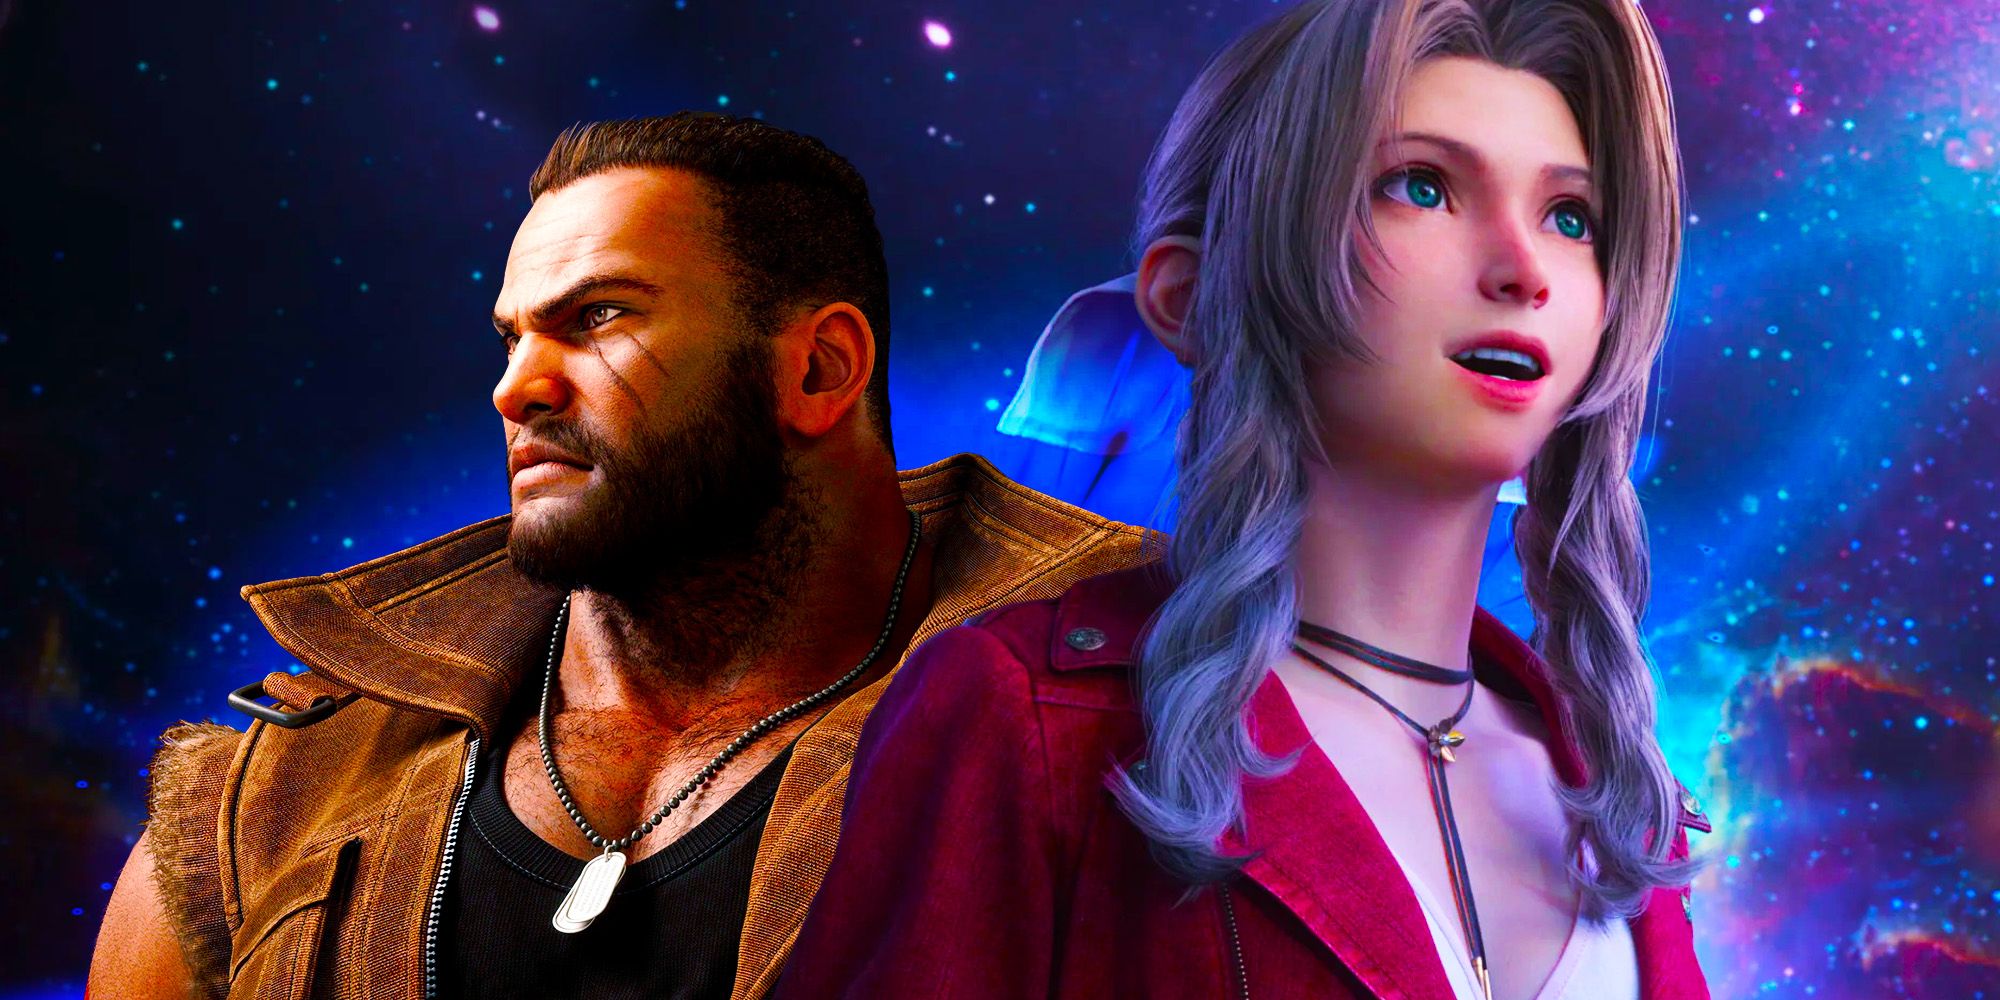 Aerith and Barret from Final Fantasy 7 Rebirth in front of a cosmic landscape.